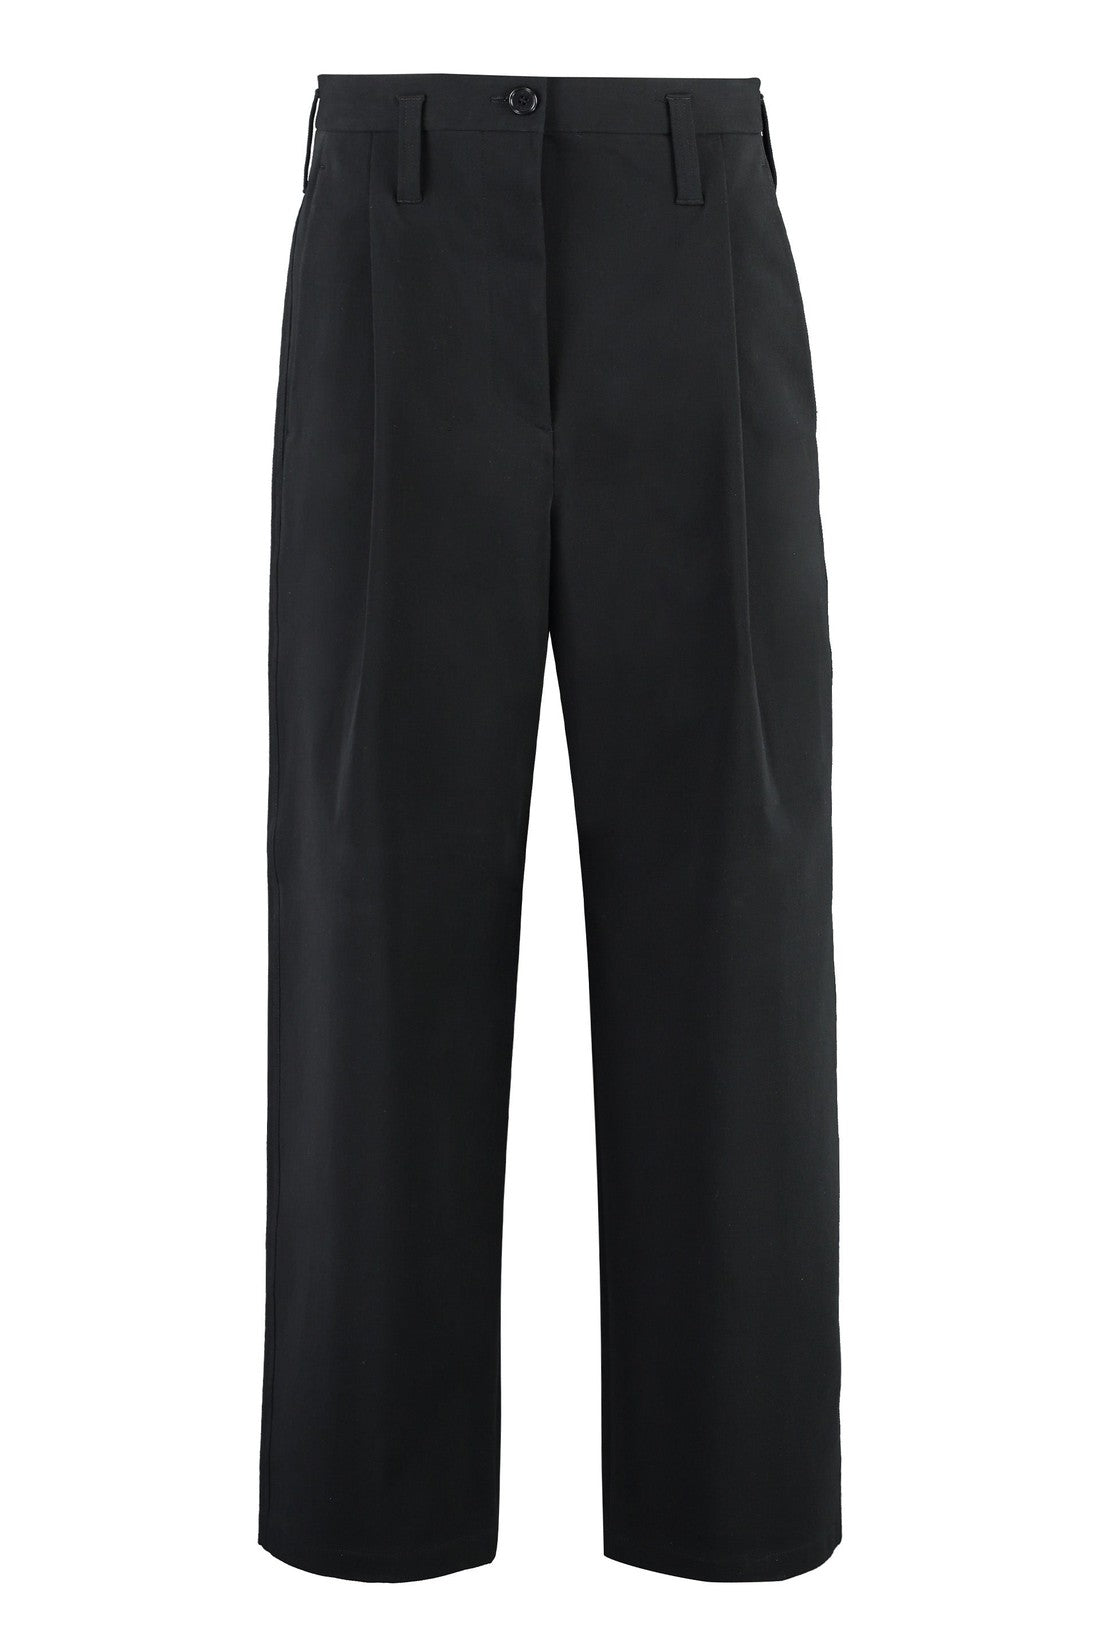 Philosophy di Lorenzo Serafini-OUTLET-SALE-High-waist tapered-fit trousers-ARCHIVIST